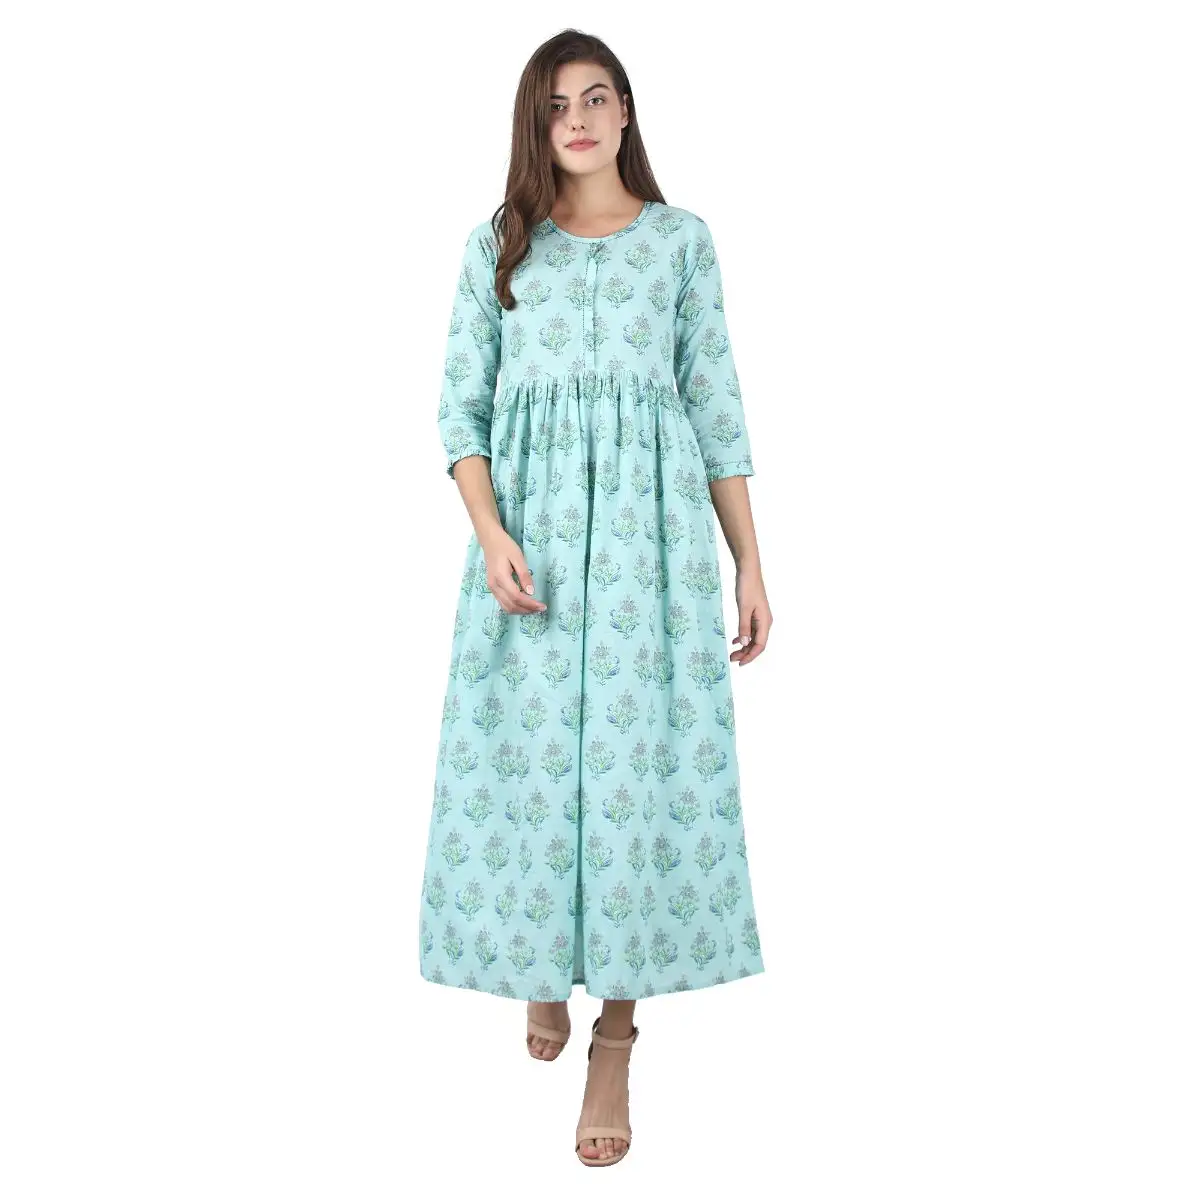 Sea Green Printed Ankle Long Ethnic Dress - Indian Designers Cotton Casual Dresses Formal Evening Party Latest Dress Designs